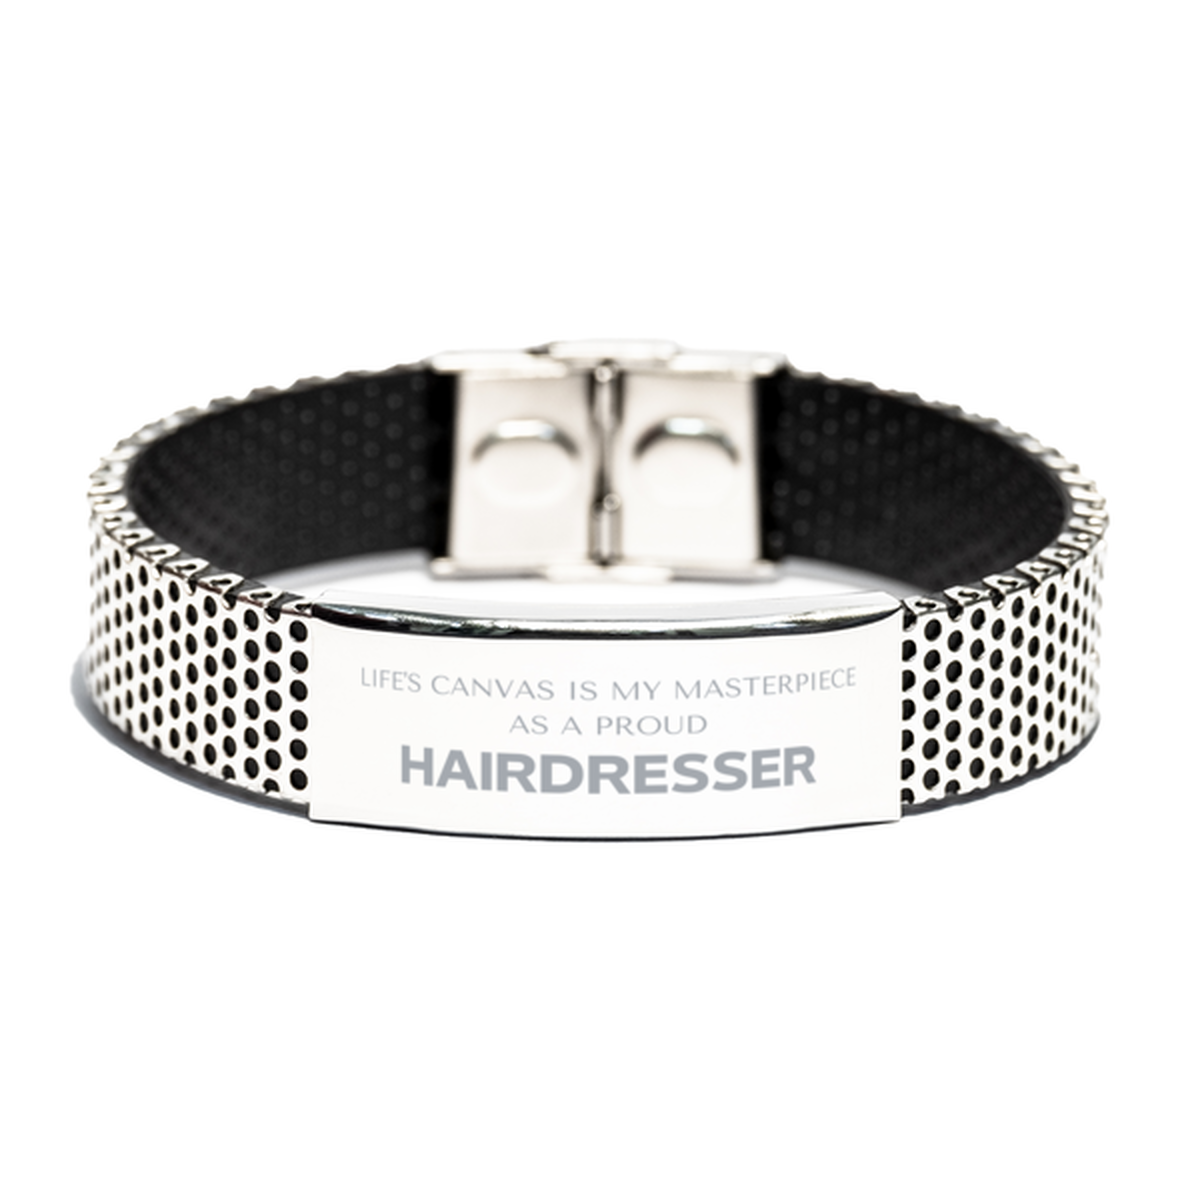 Proud Hairdresser Gifts, Life's canvas is my masterpiece, Epic Birthday Christmas Unique Stainless Steel Bracelet For Hairdresser, Coworkers, Men, Women, Friends